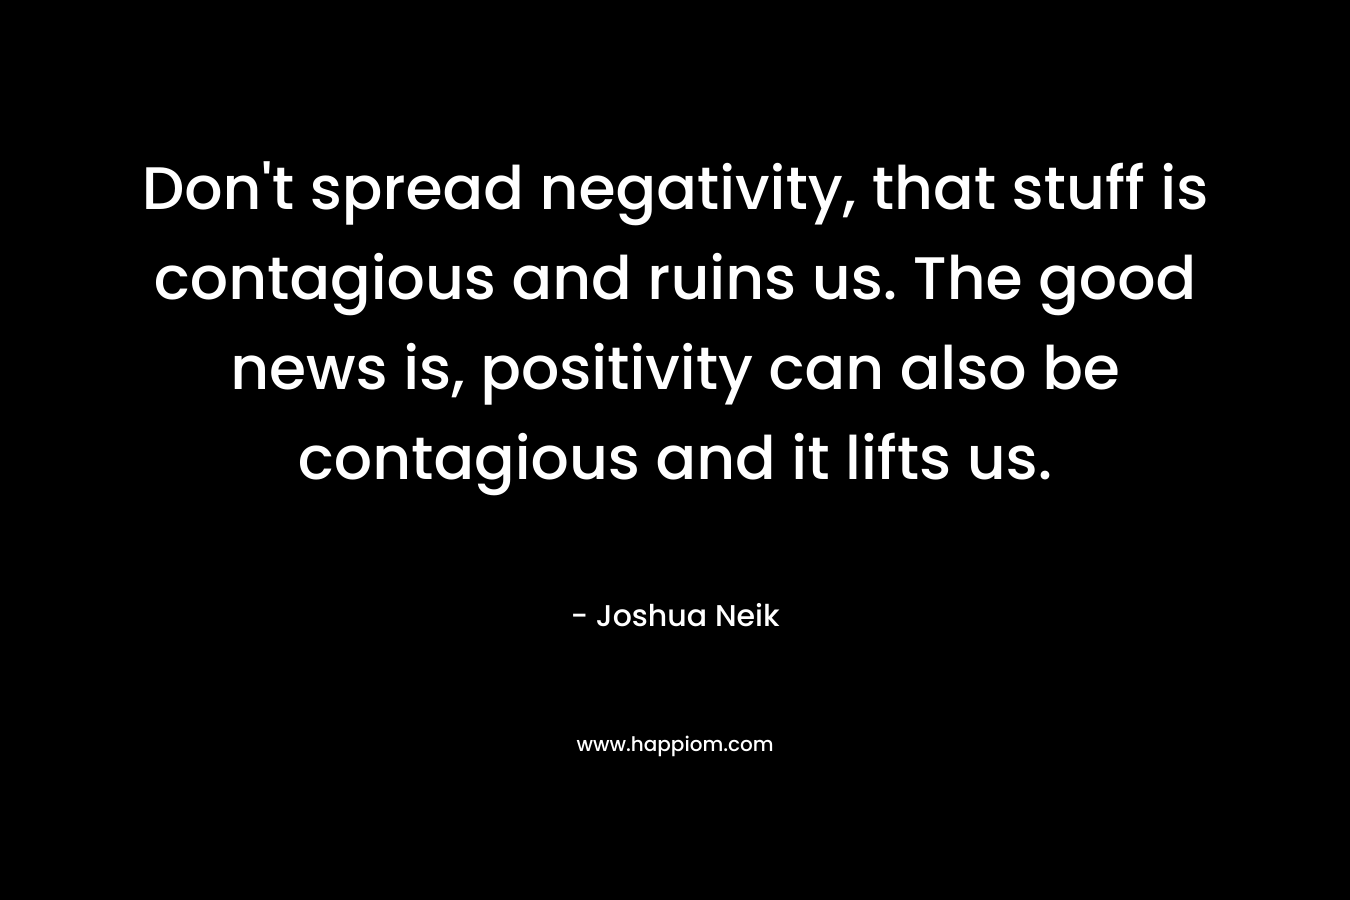 Don't spread negativity, that stuff is contagious and ruins us. The good news is, positivity can also be contagious and it lifts us.